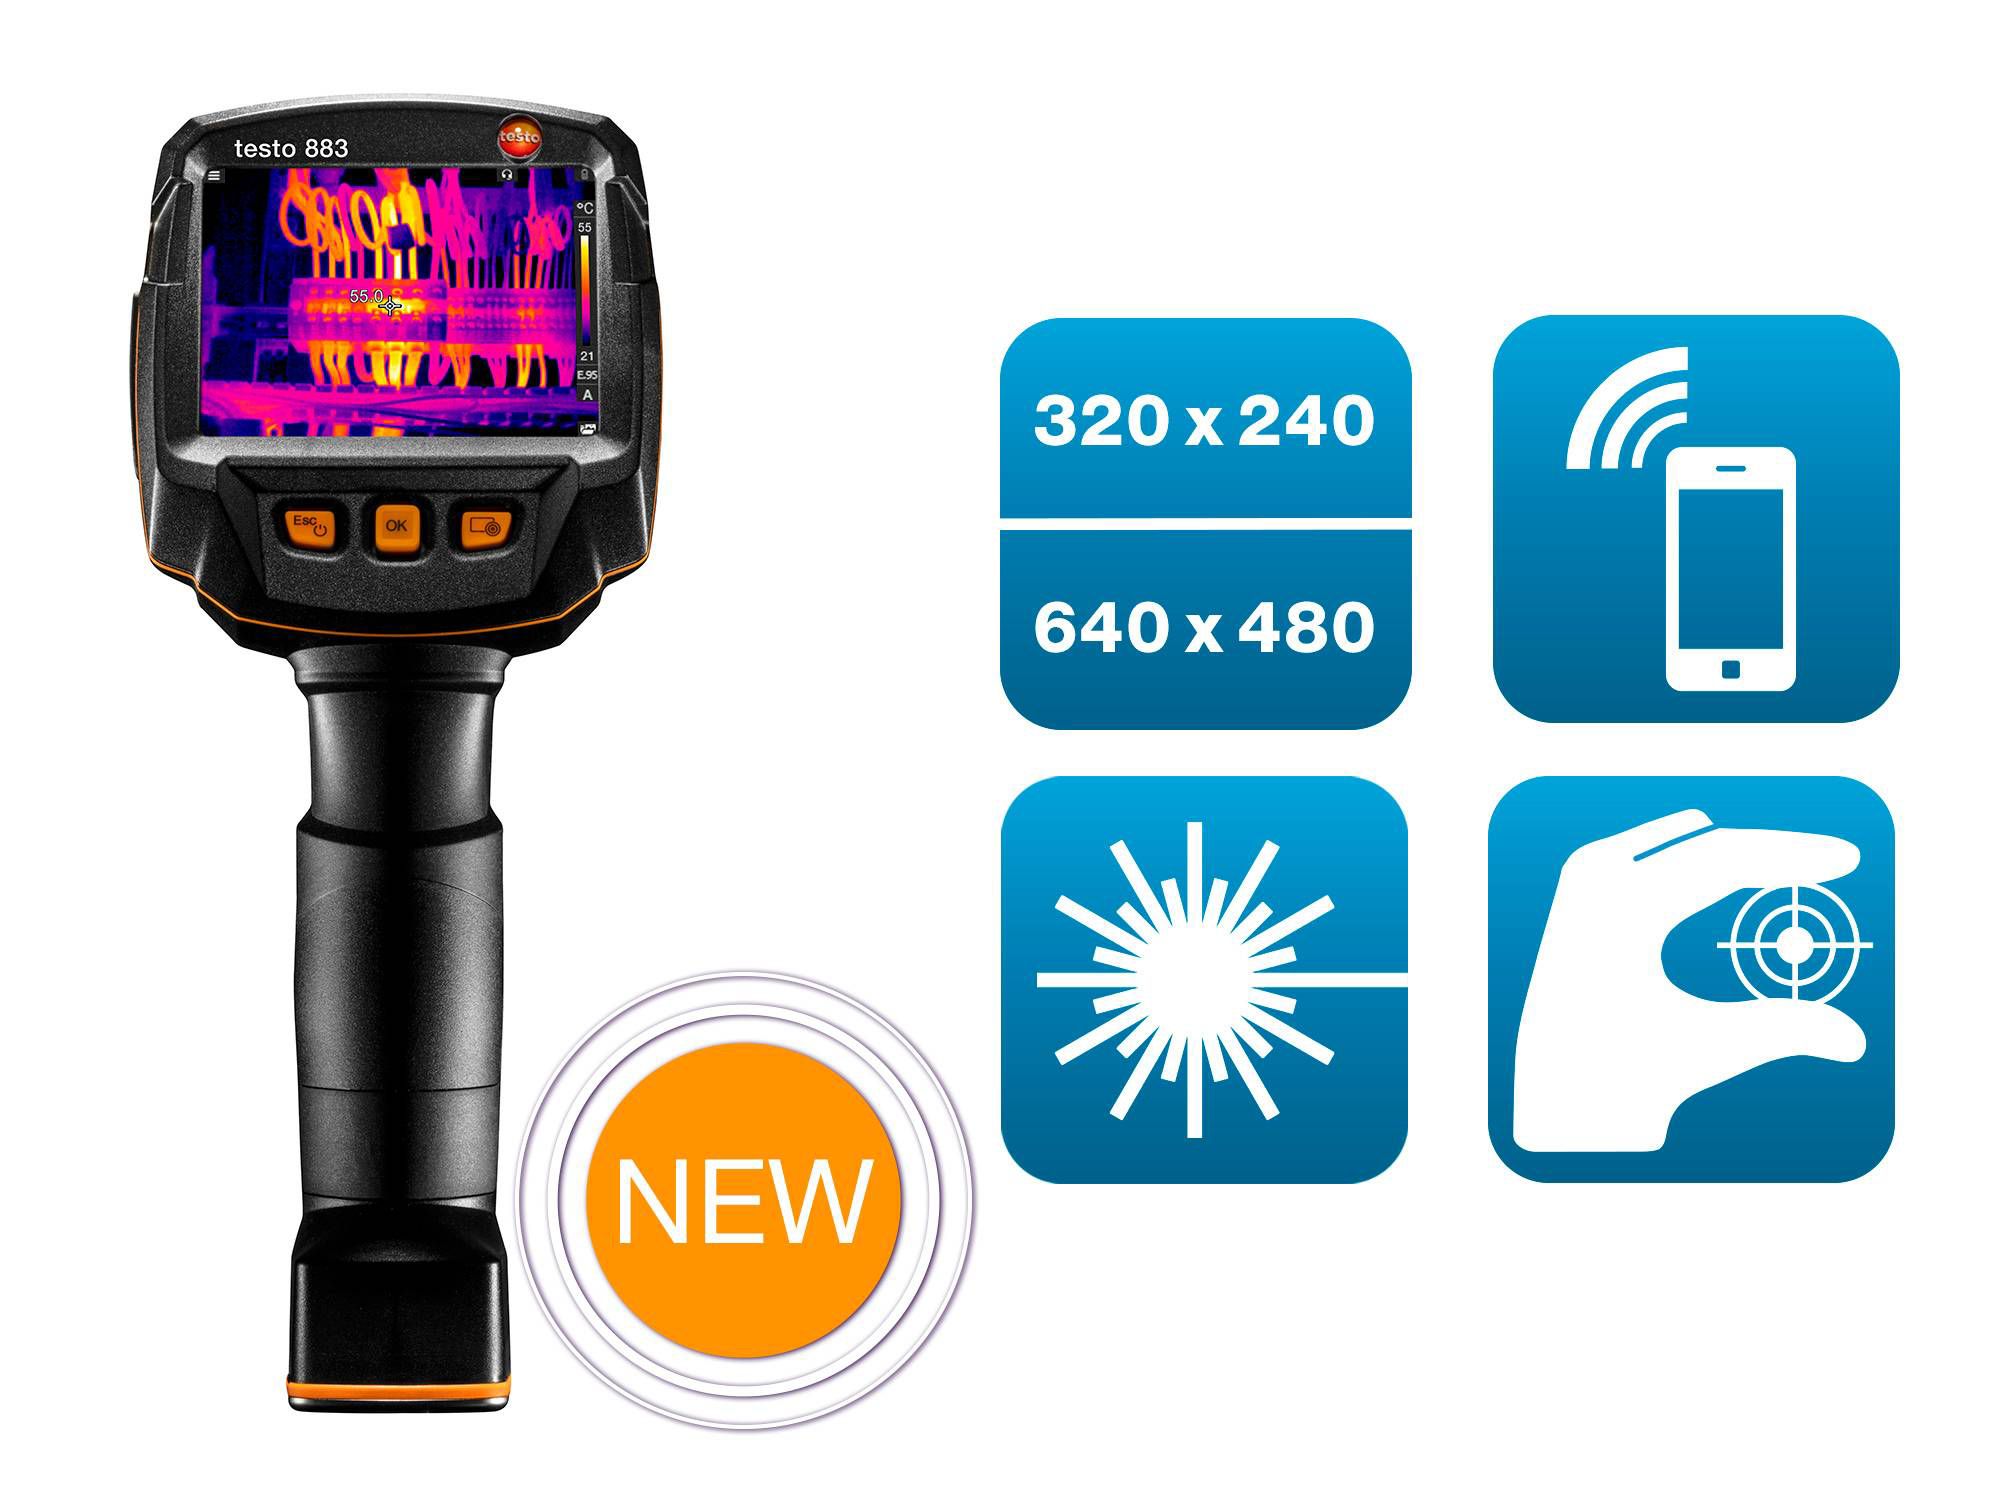 Thermal Imager with automatic Image Management Testo 883